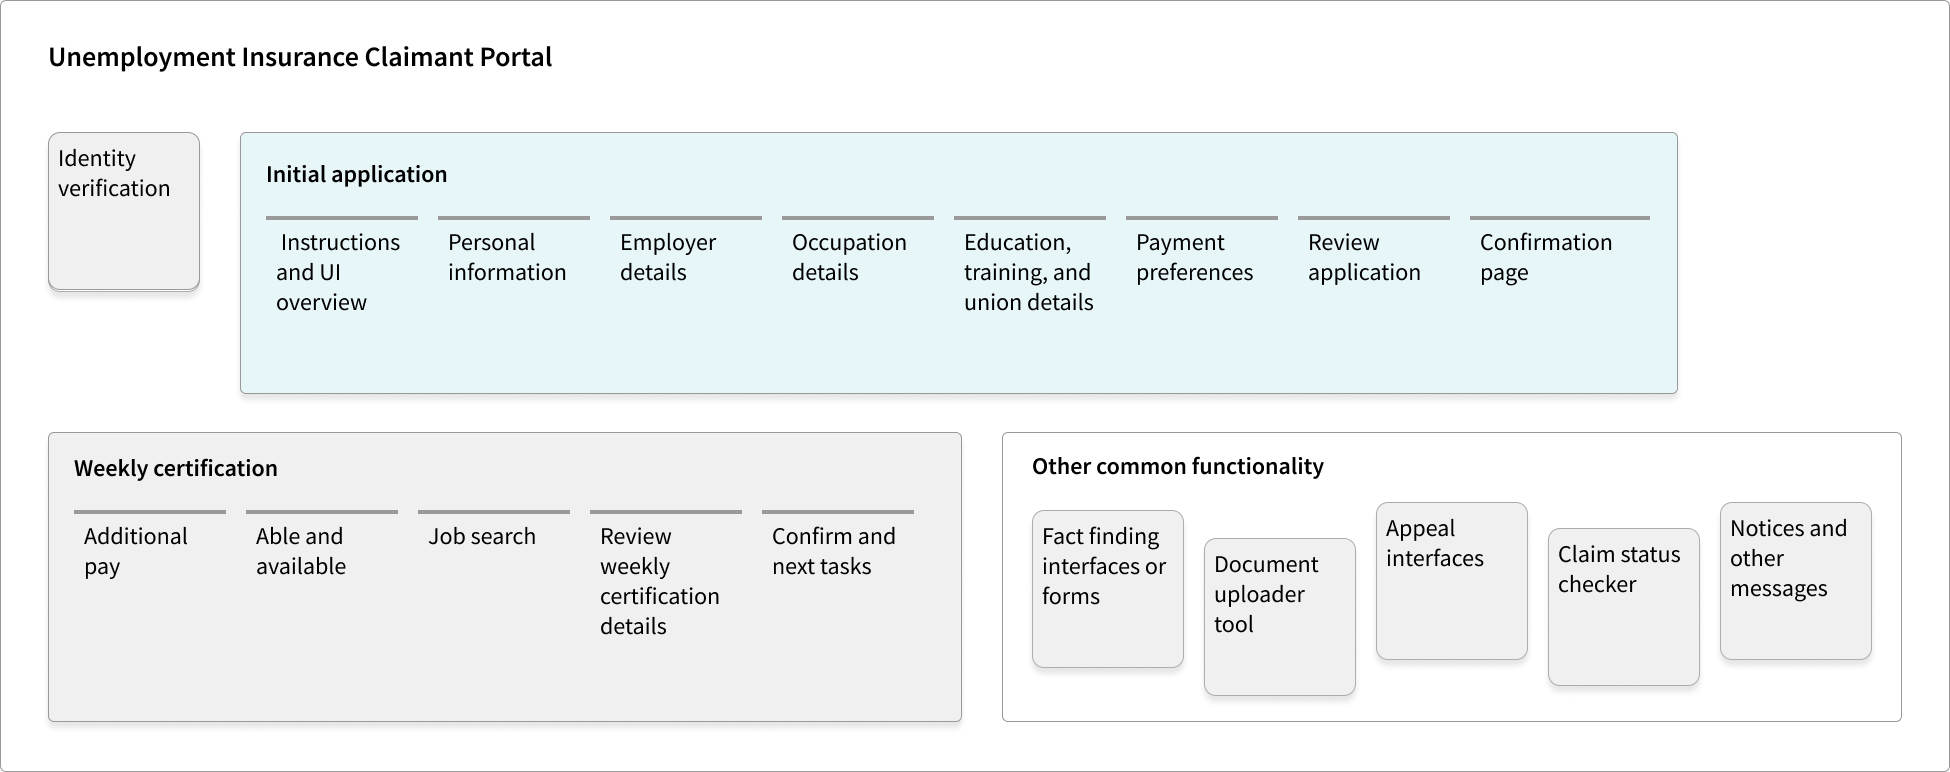 An overview of the Unemployment Insurance process, including identity verification, initial application and weekly certification steps.